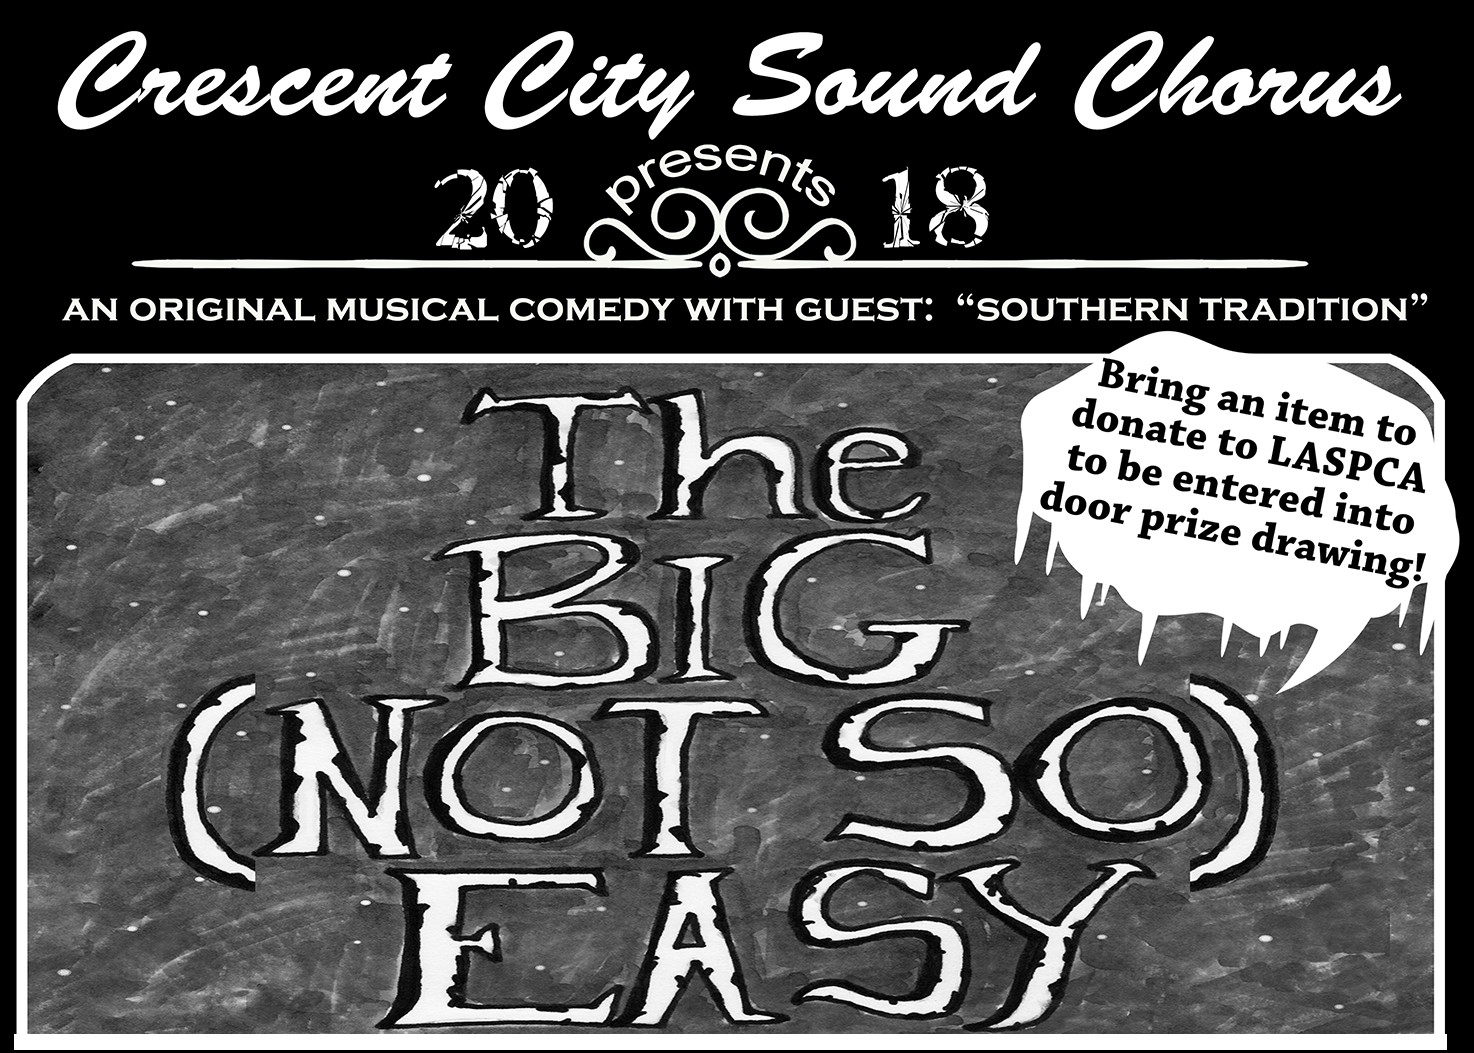 Crescent City Sound Chorus presents The Big (Not So) Easy - Fall Show - 7:00 pm